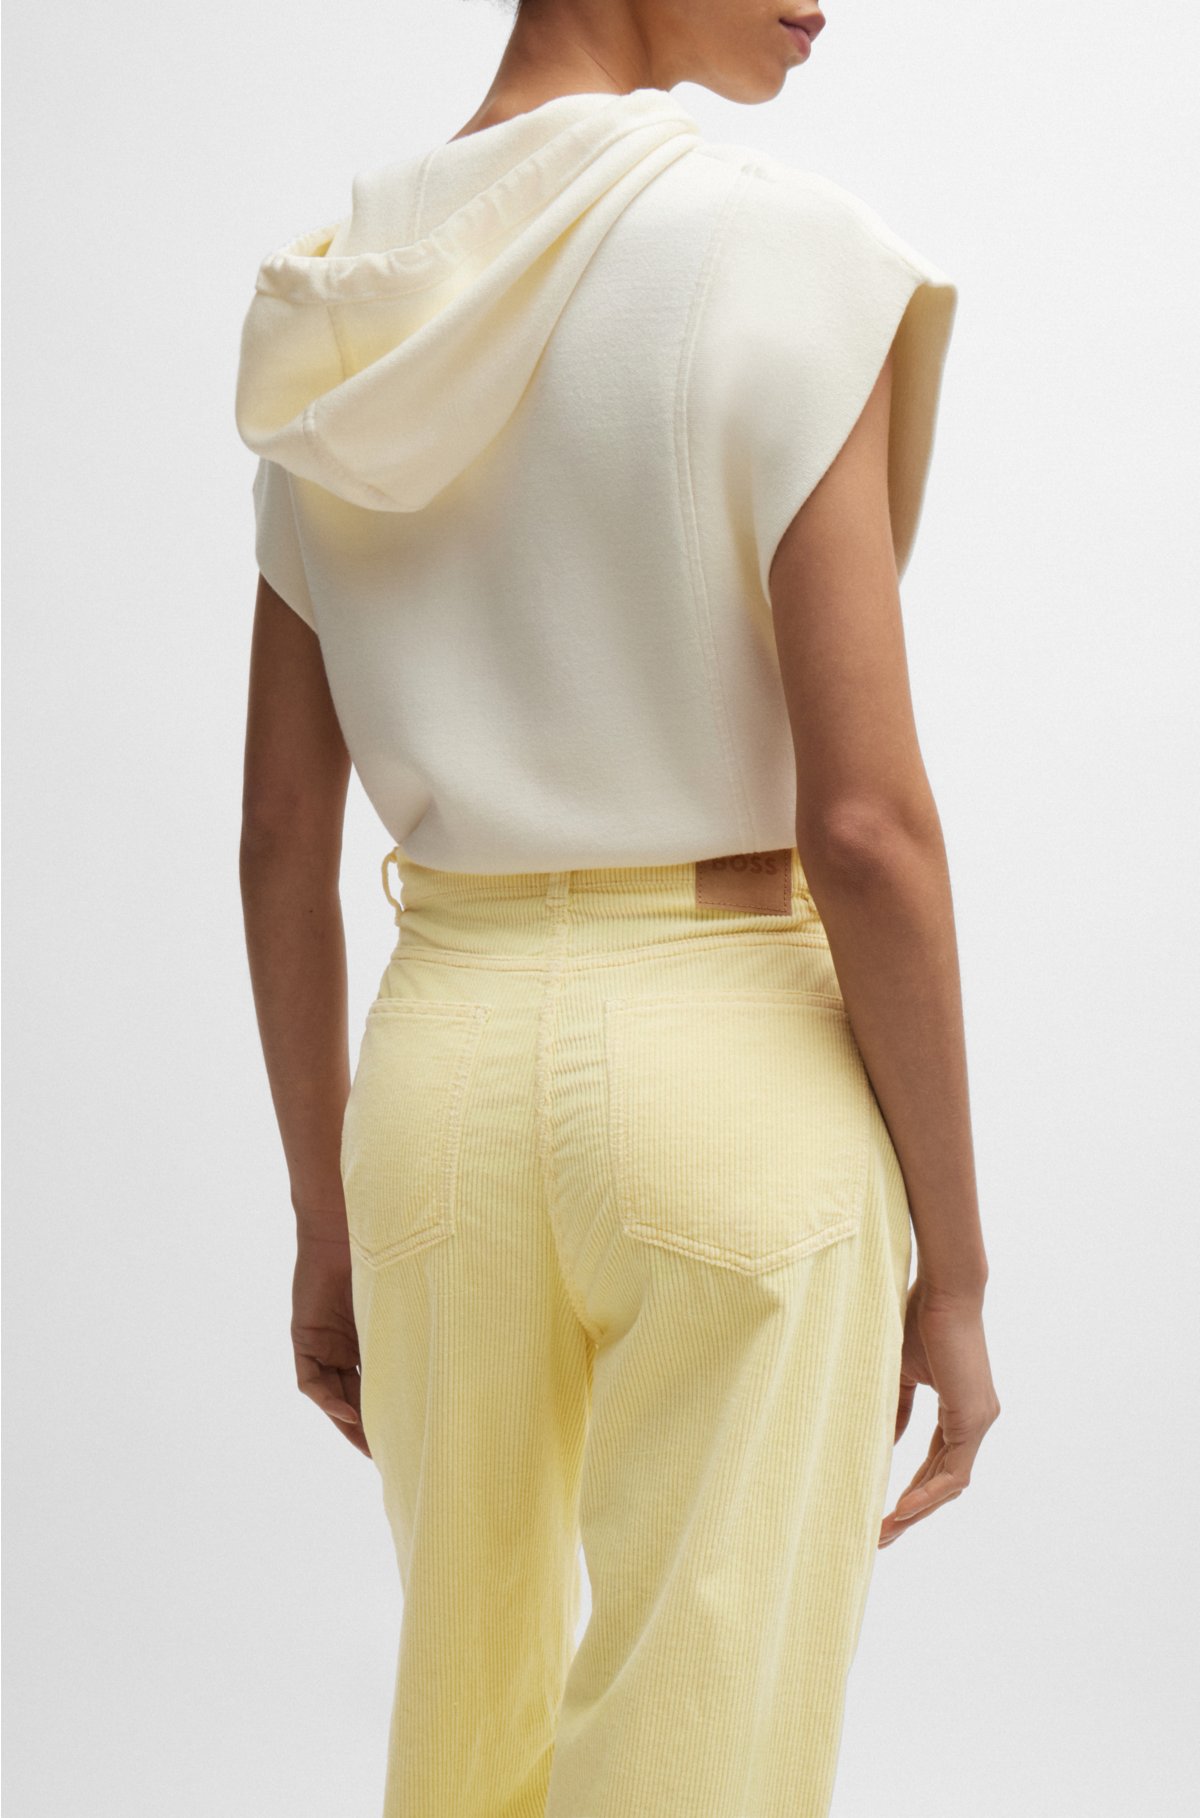 Regular-fit trousers in cotton-blend corduroy, Light Yellow